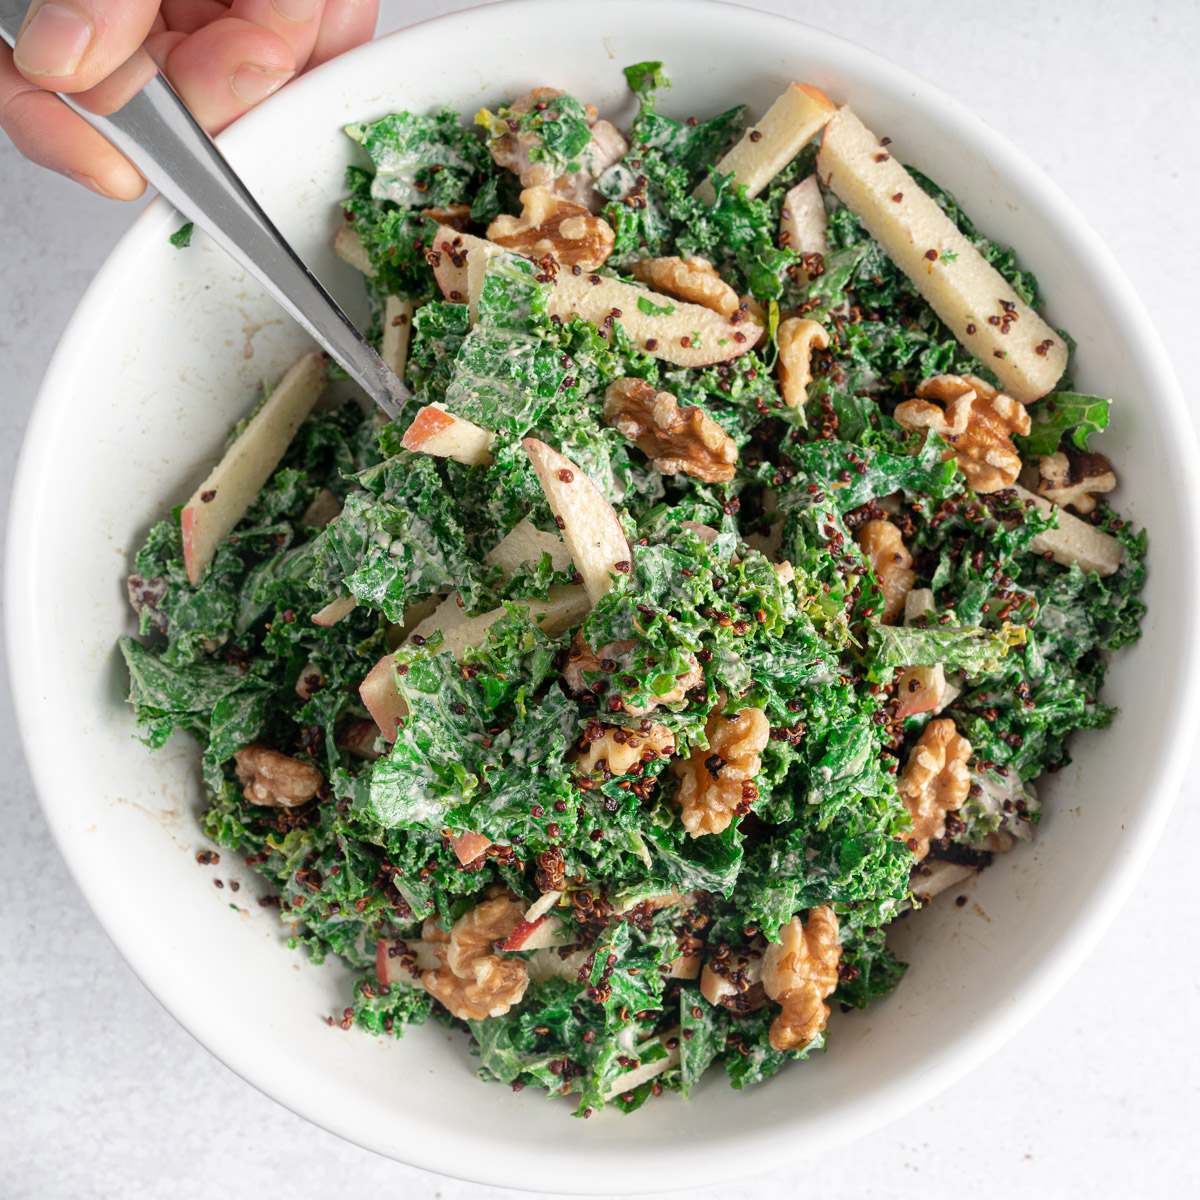 This is an image of a Kale Apple Walnut Salad